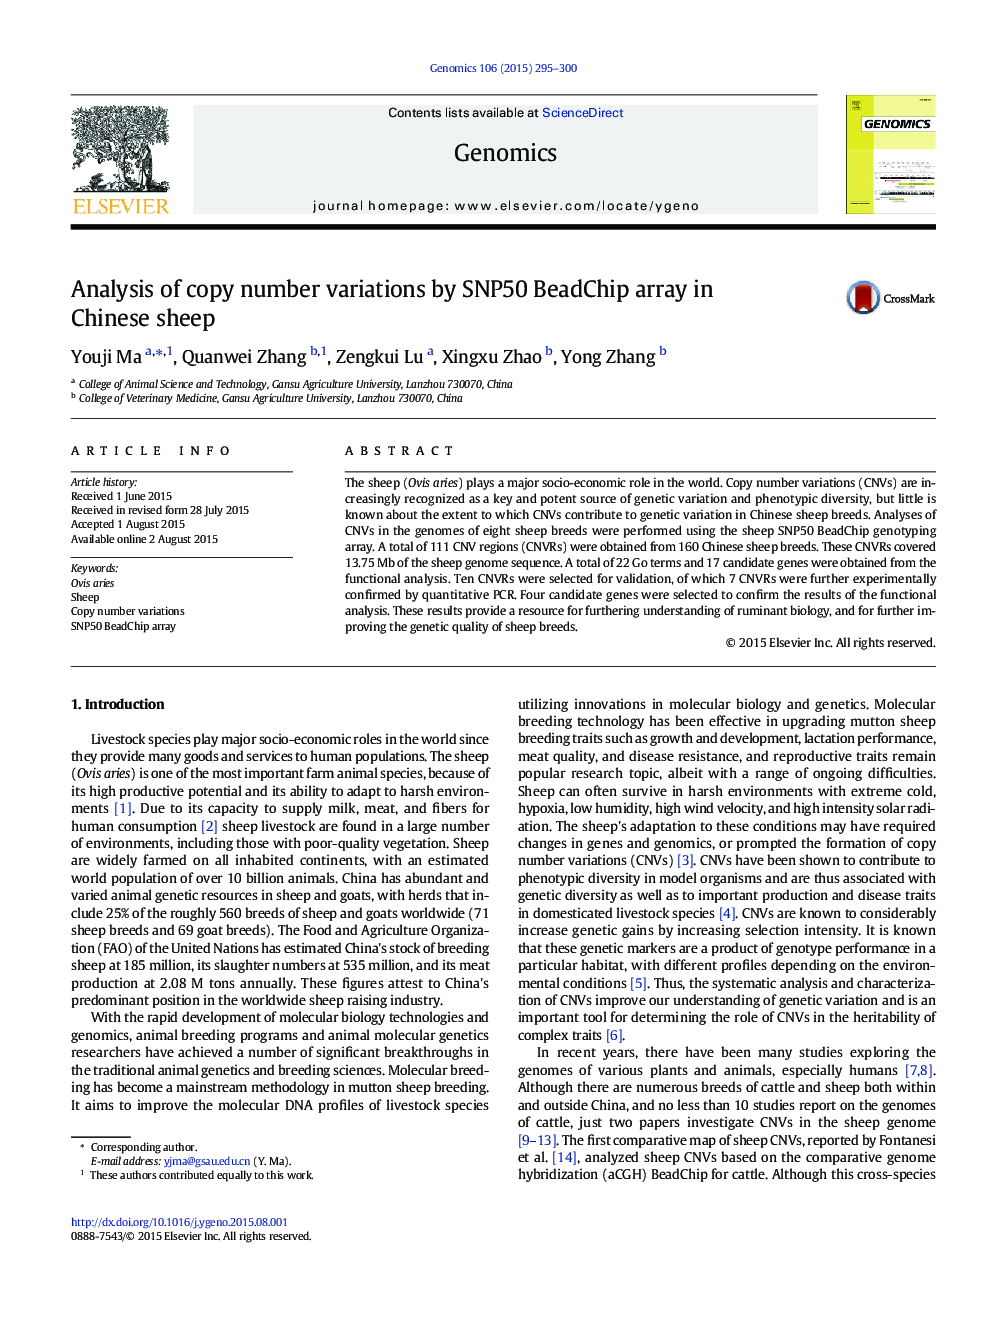 Analysis of copy number variations by SNP50 BeadChip array in Chinese sheep